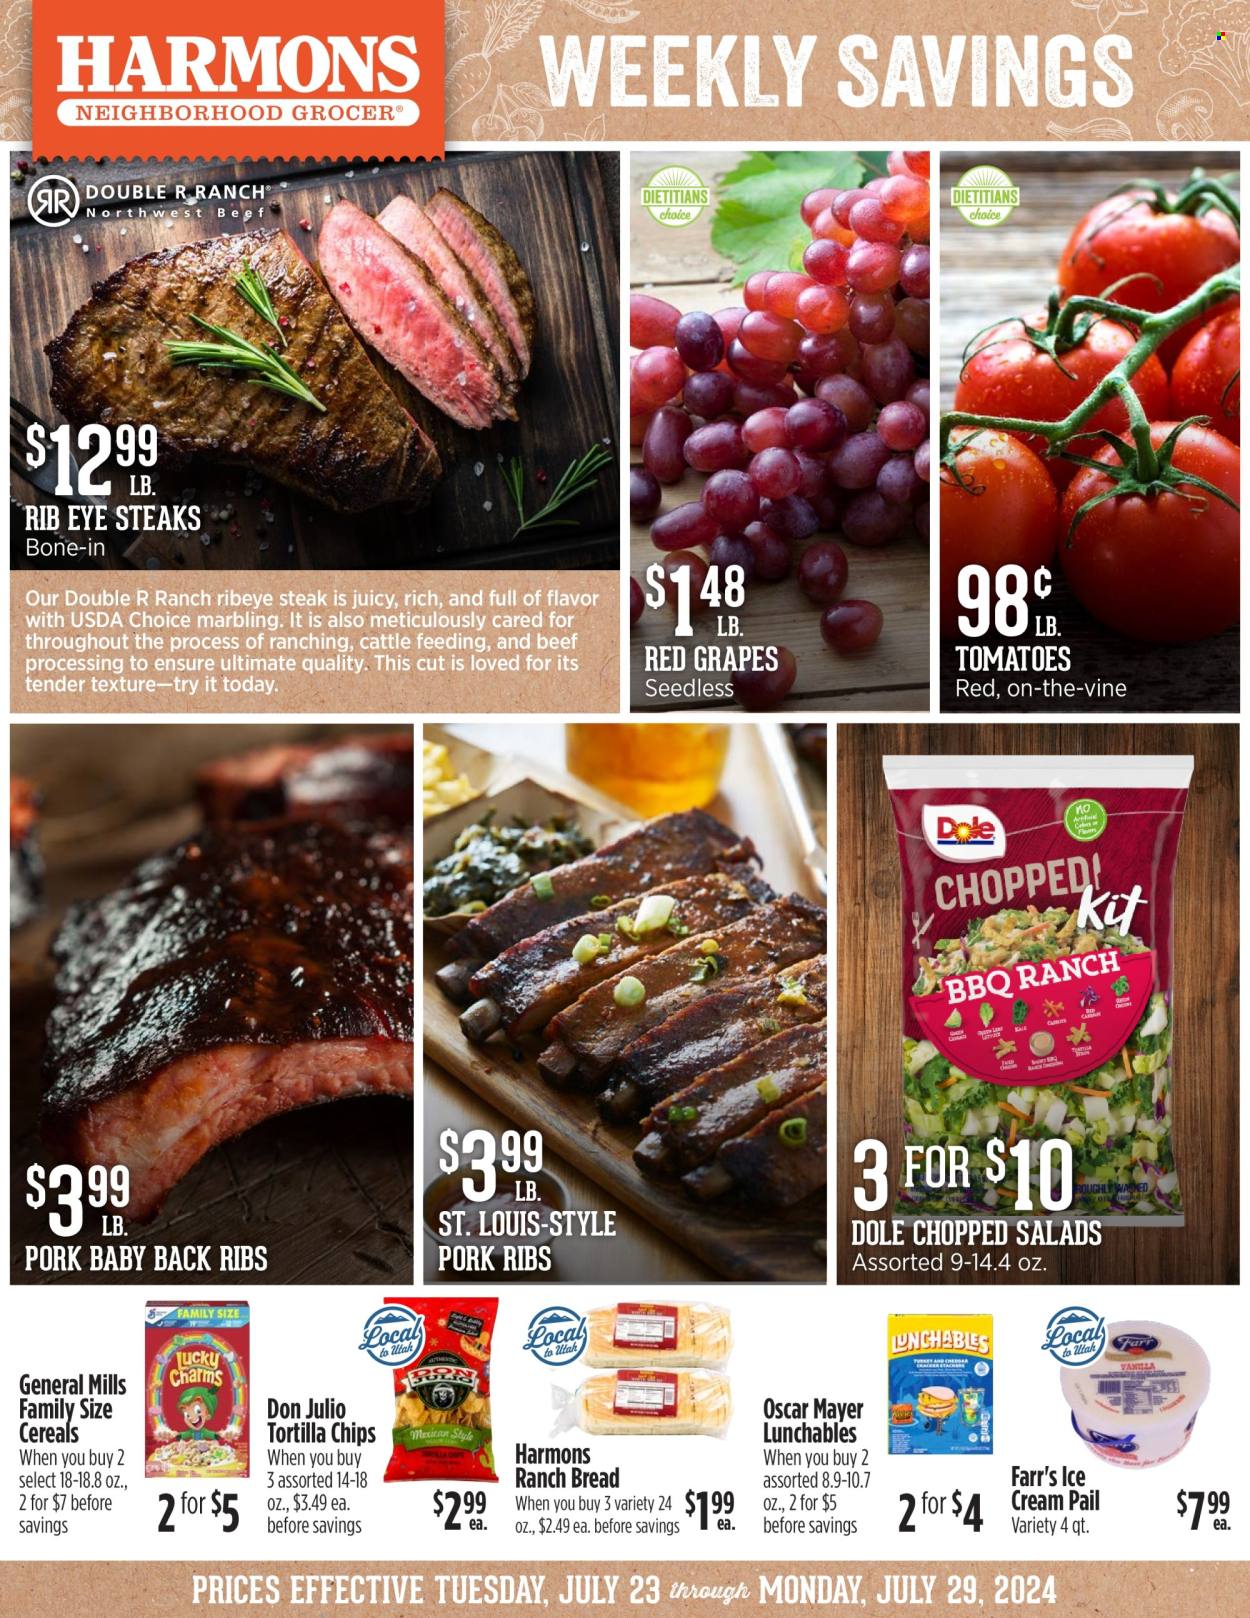 thumbnail - Harmons Flyer - 07/23/2024 - 07/29/2024 - Sales products - bread, tomatoes, salad, Dole, chopped salad, grapes, snack, Lunchables, Oscar Mayer, ice cream, General Mills, tortilla chips, chips, beef meat, beef steak, steak, ribeye steak, ribs, pork meat, pork ribs, pork back ribs, nutritional supplement. Page 1.